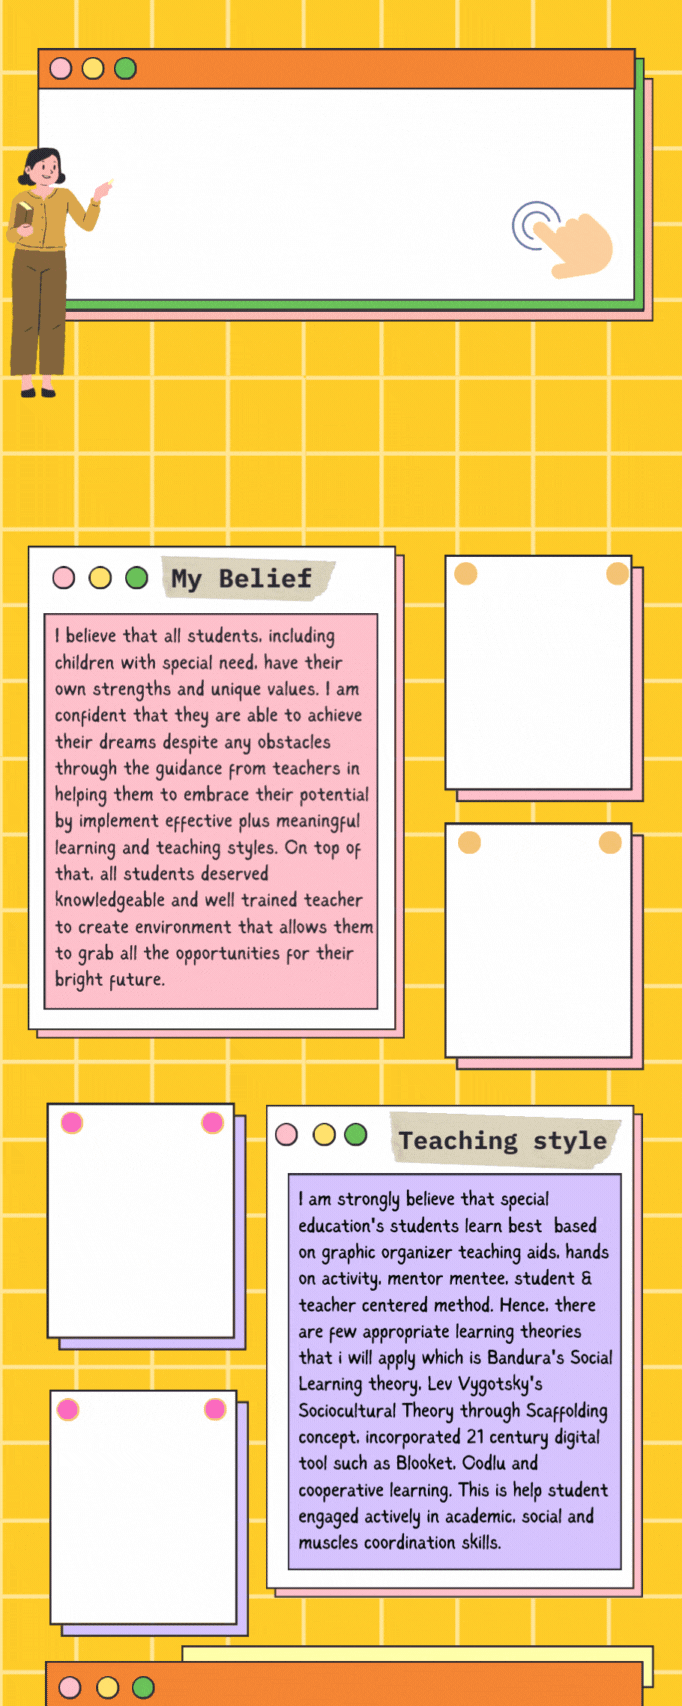 Grids and Lines Map Skills Education Infographic.gif